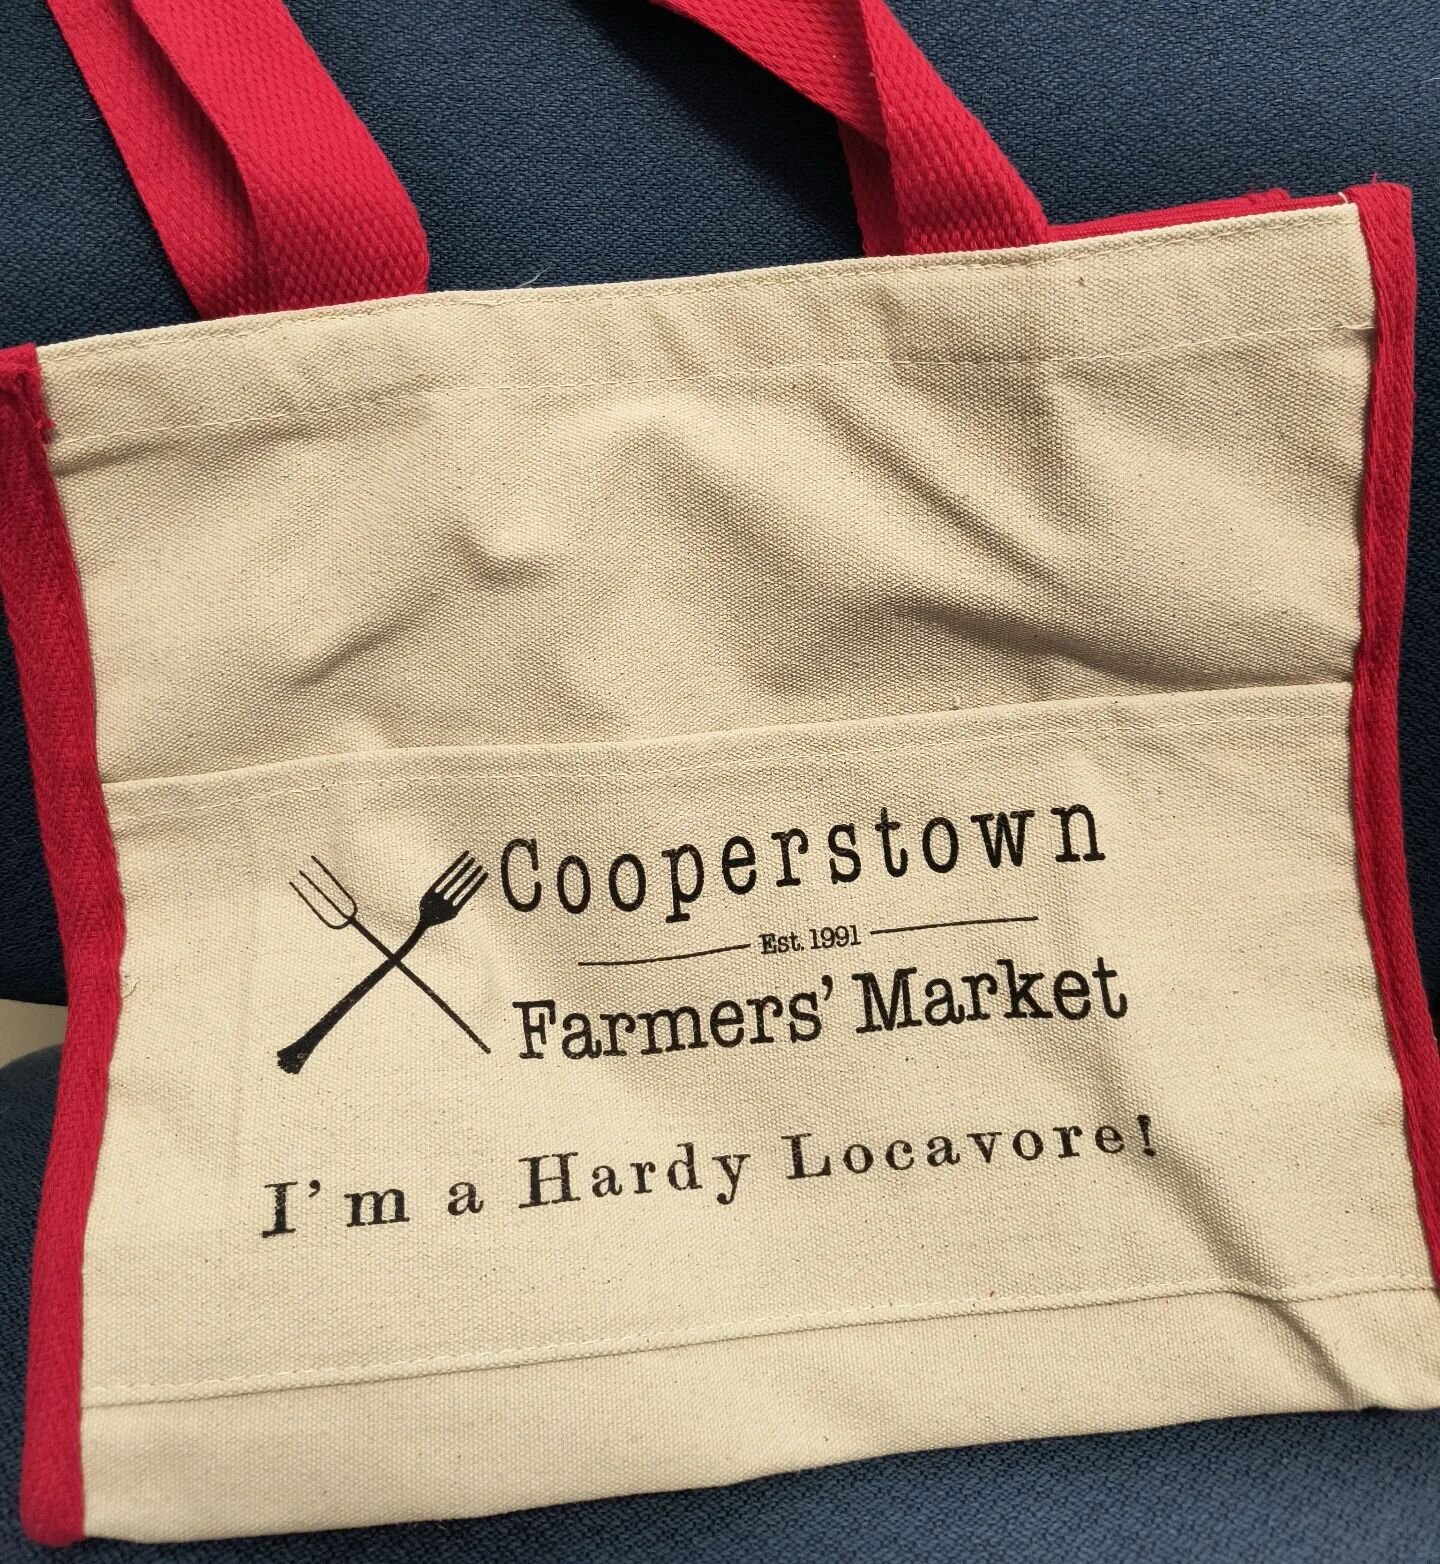 Hooray for Hardy Locavores aka customers who shop the year-round Cooperstown Farmers' Market, even in the colder months! 

#customerappreciation #locavore #farmersmarket